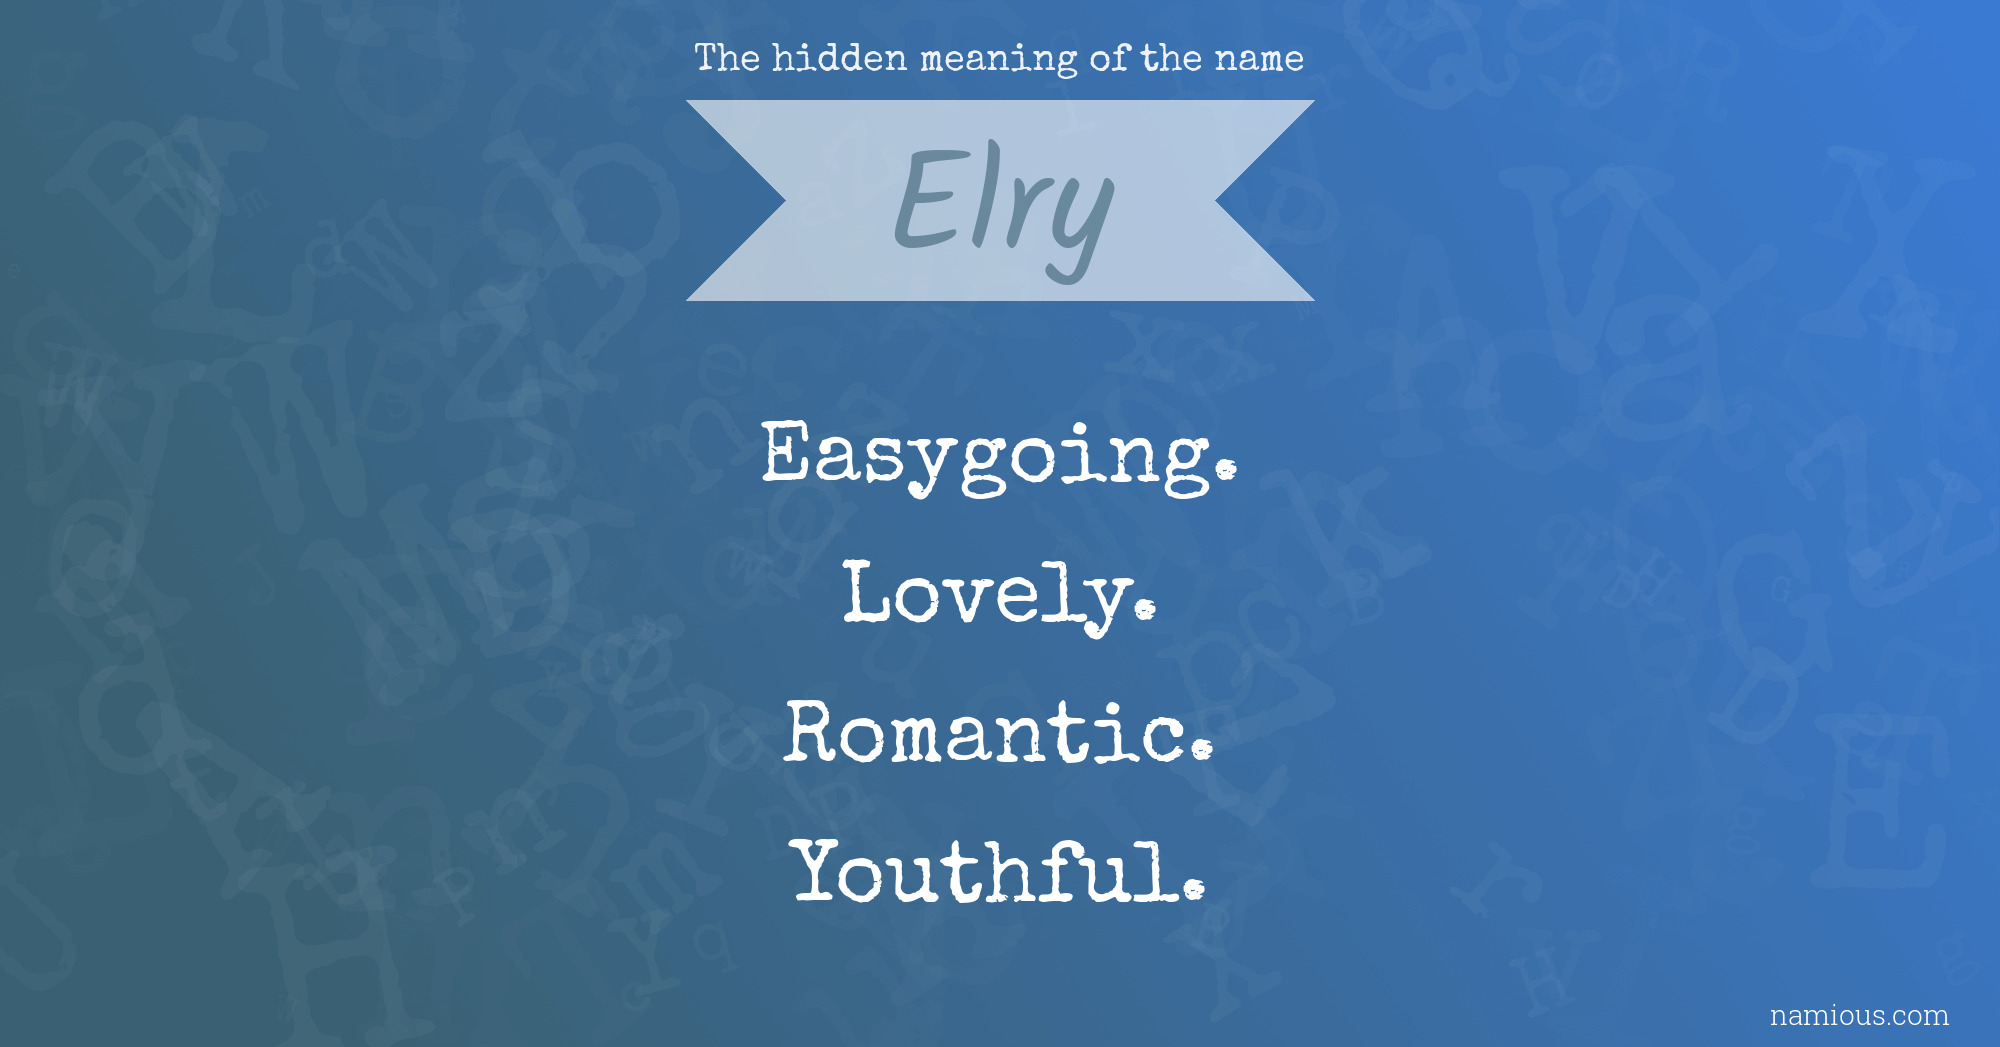 The hidden meaning of the name Elry